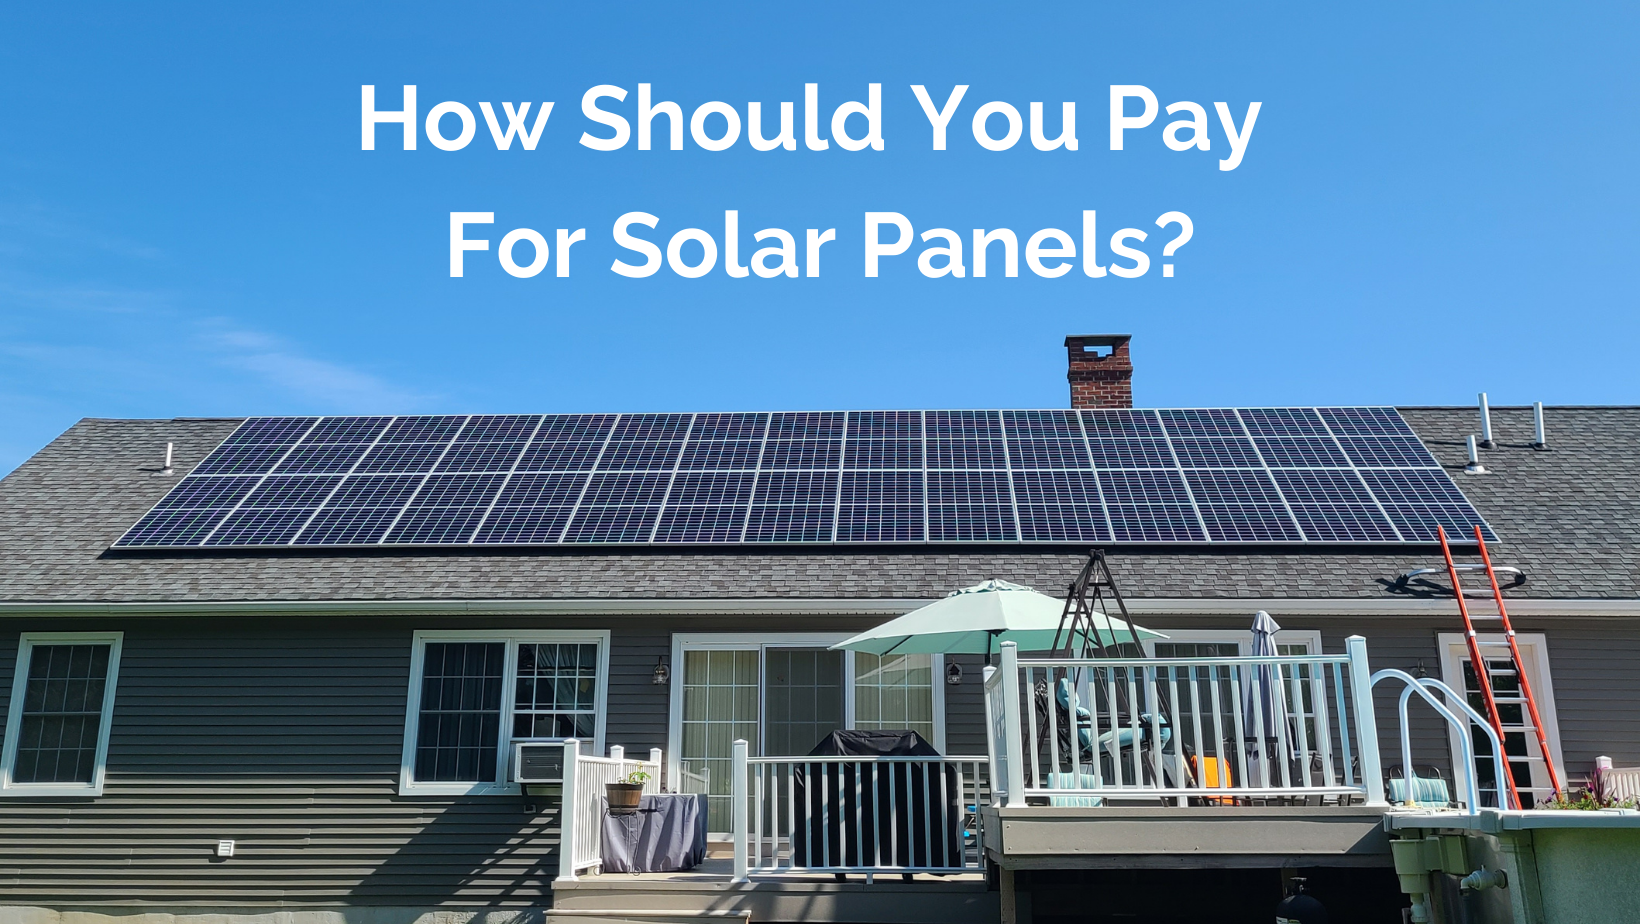 How should you pay for solar panels?